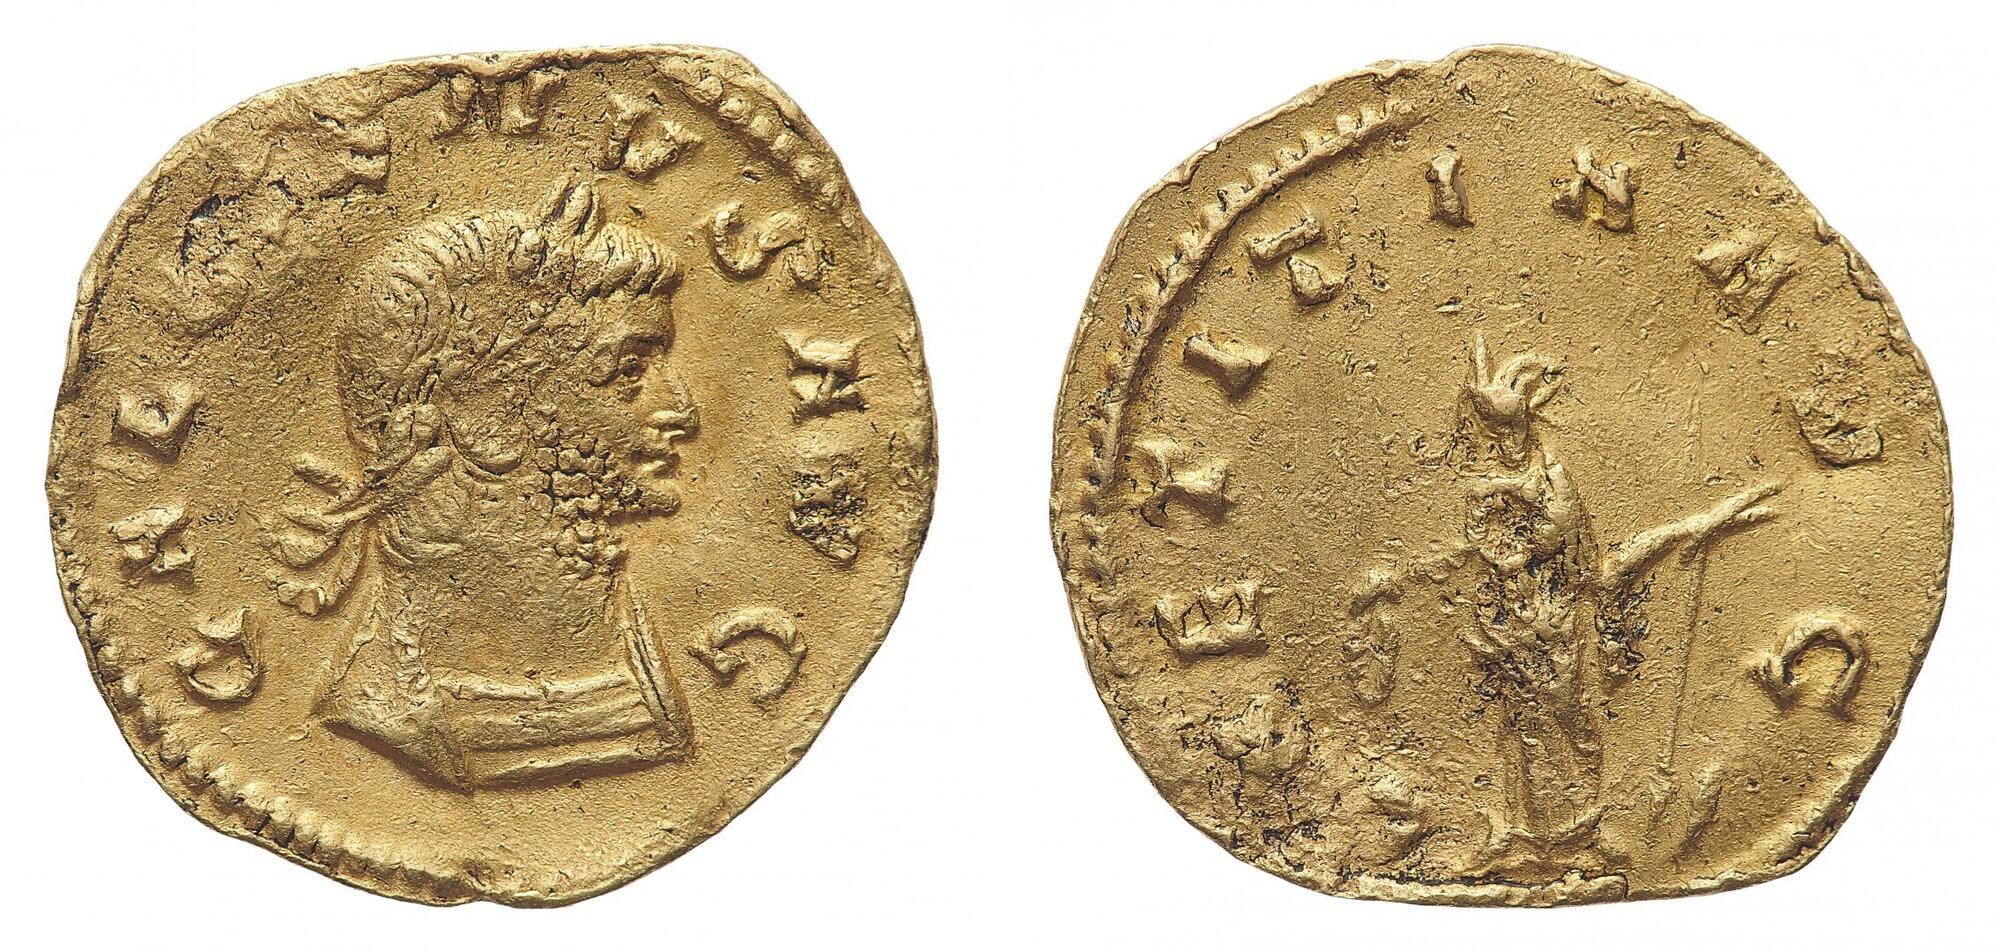 CoinArchives.com Search Results : Gallienus and Aureus